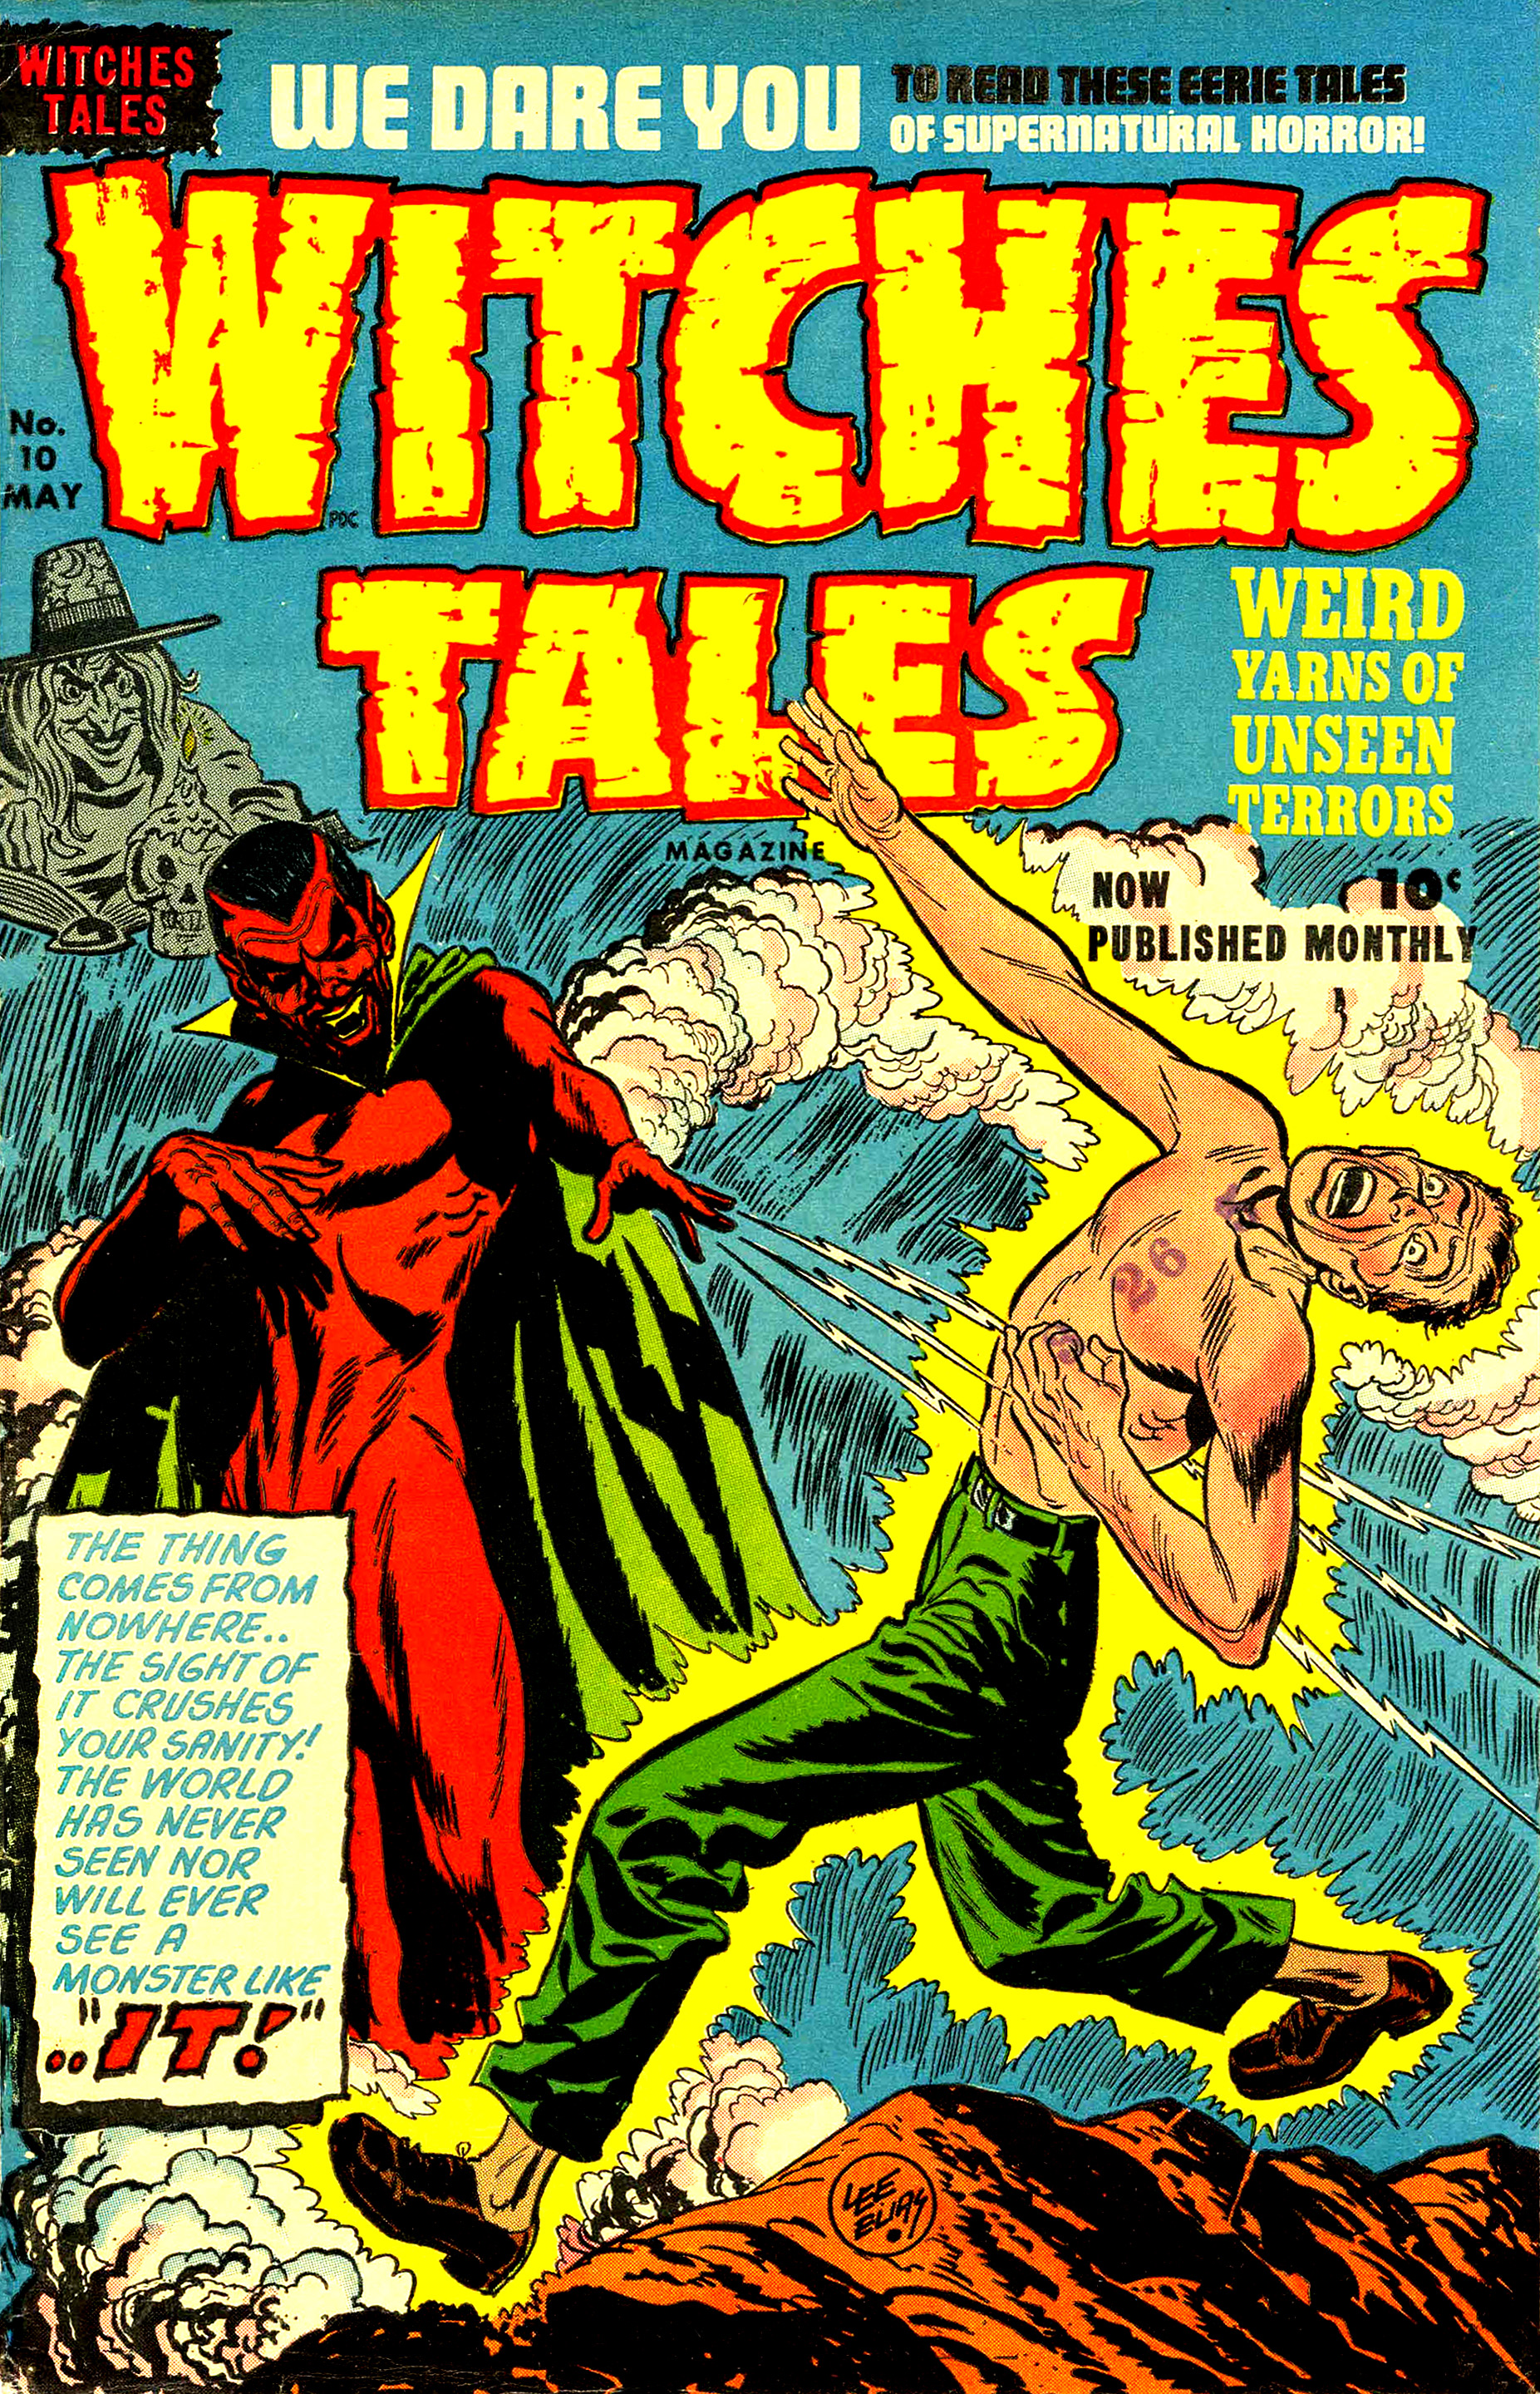 Witches Tales #10, Lee Elias Cover (Harvey, 1952)